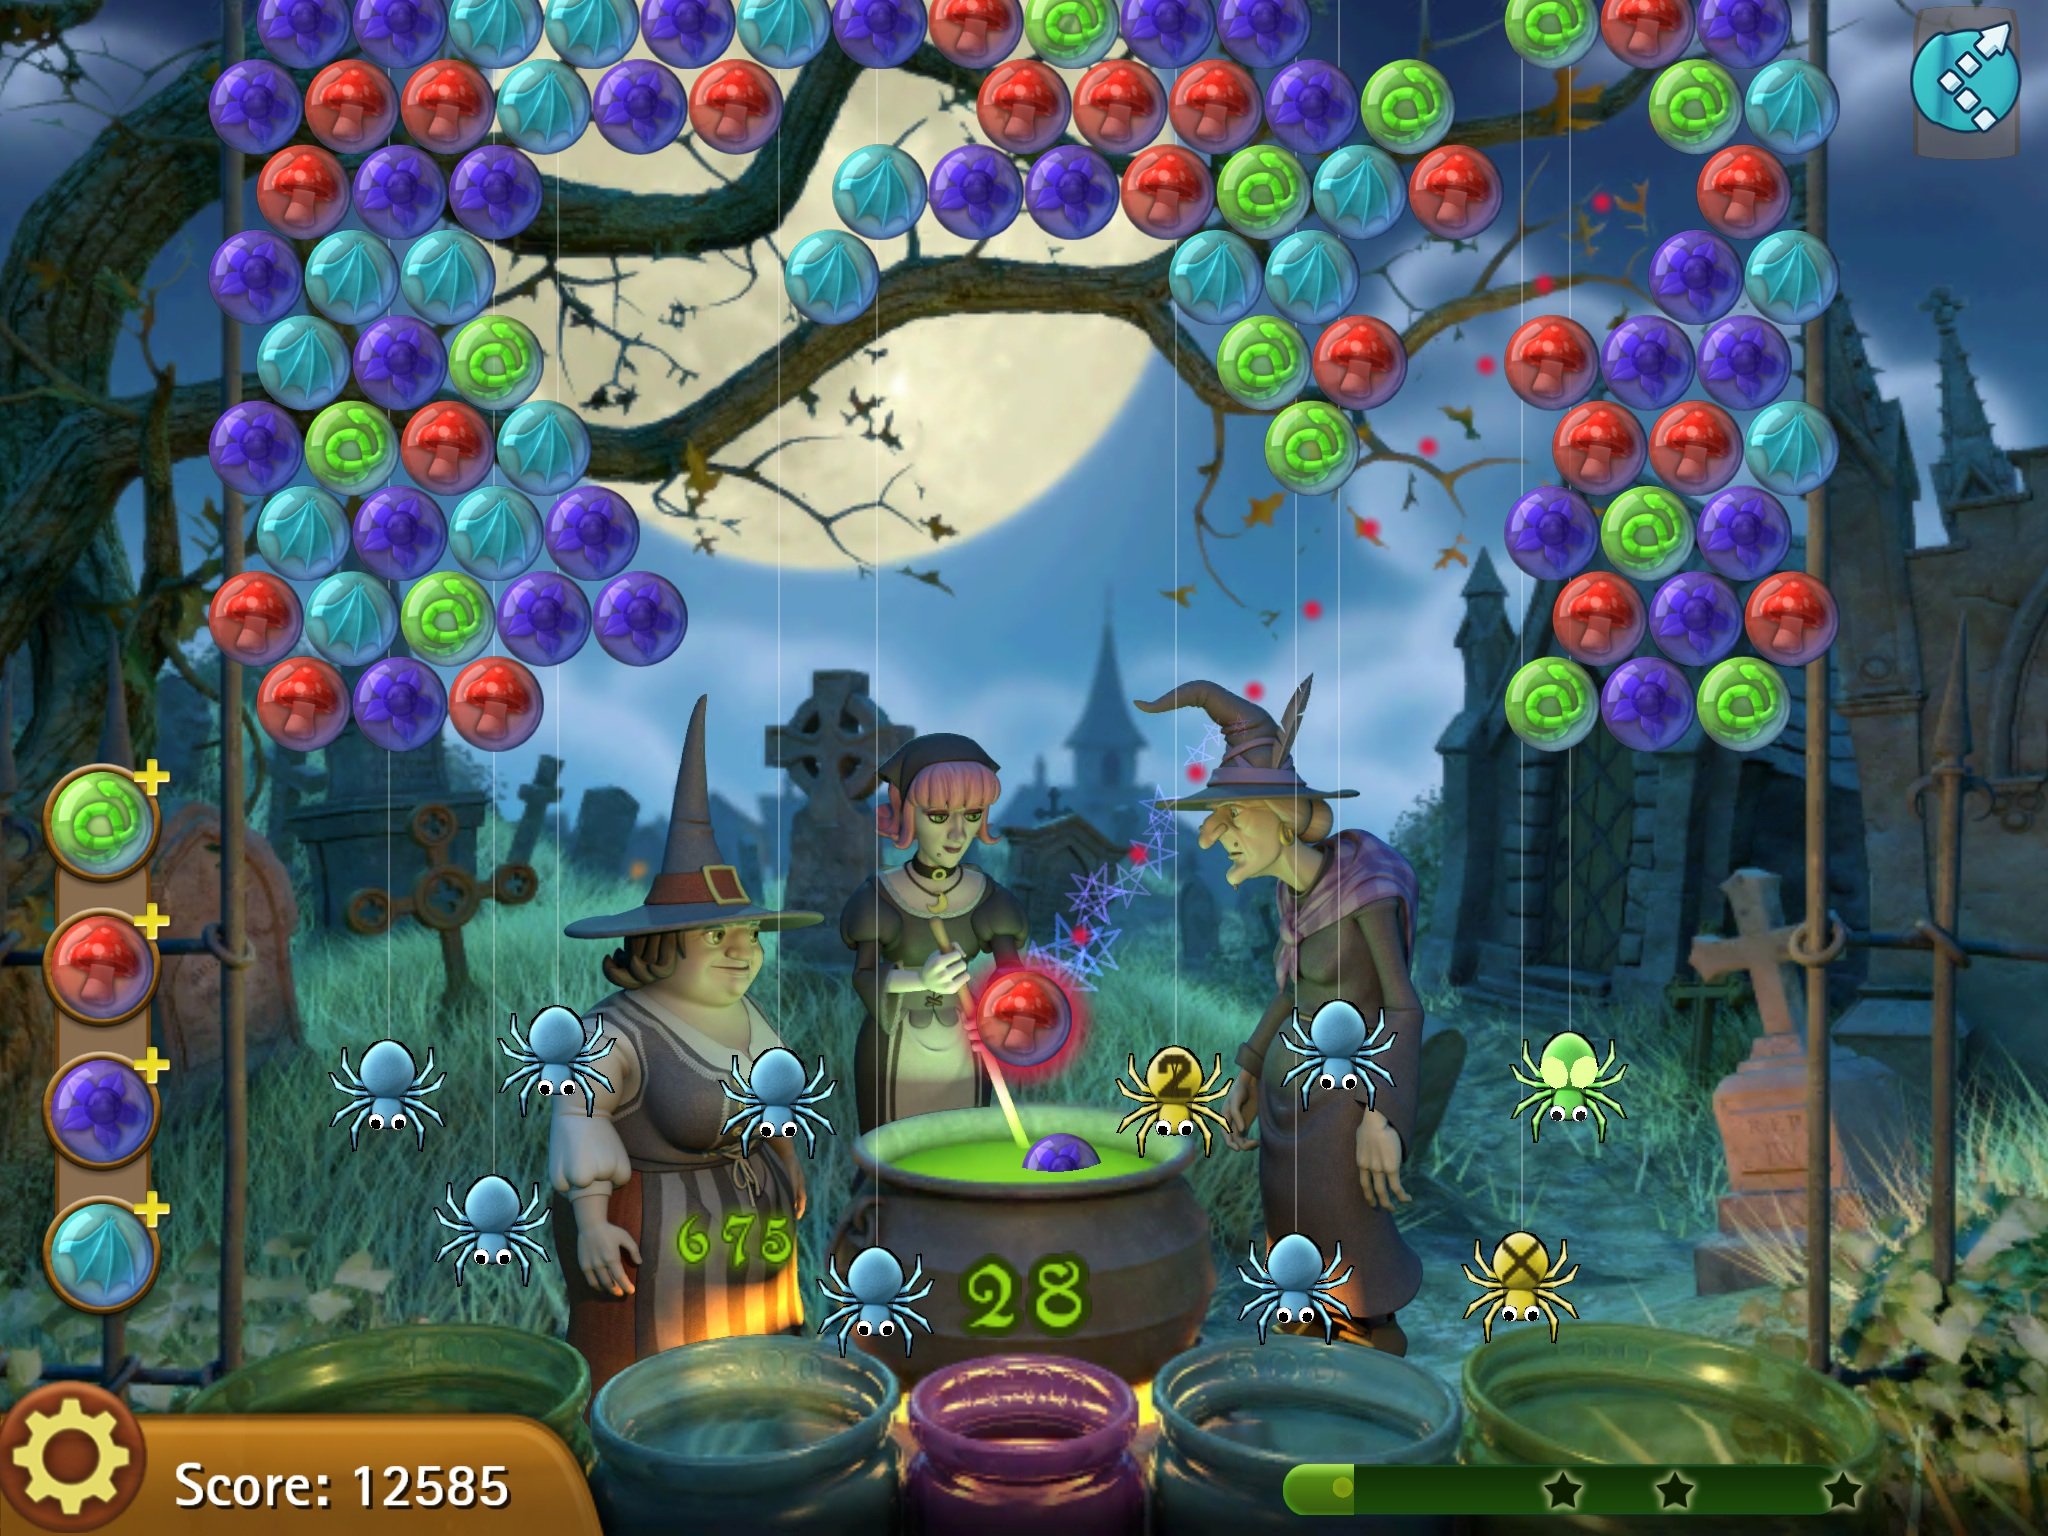 Bubble Witch Saga: Top 10 tips, hints, and cheats you need to know!